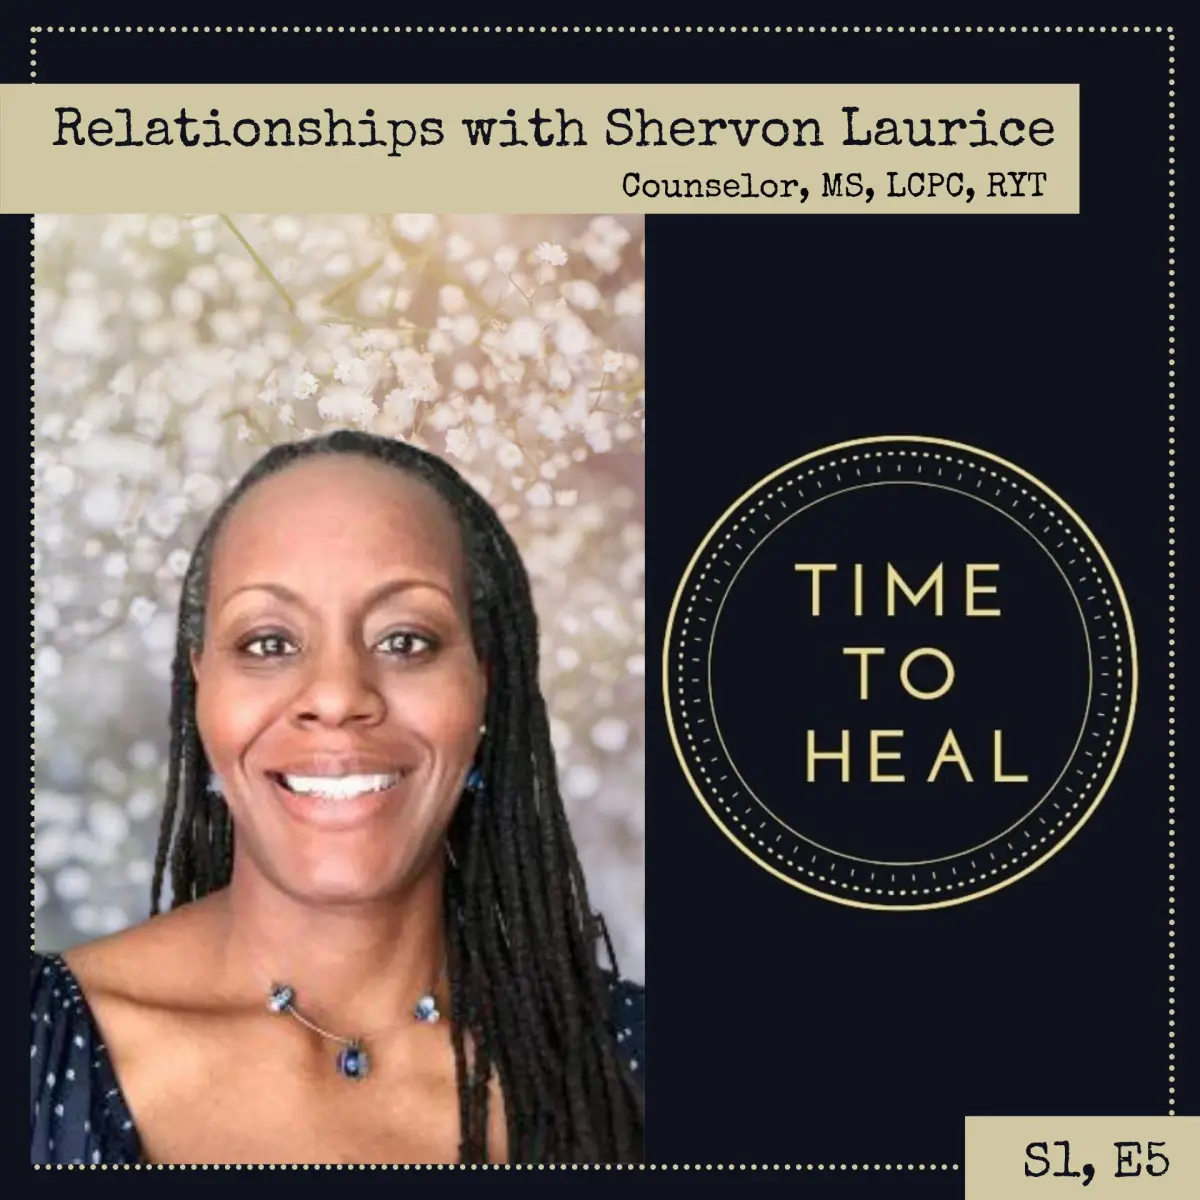 Relationships with Shervon Laurice, Counselor, MS, LCPC, RYT